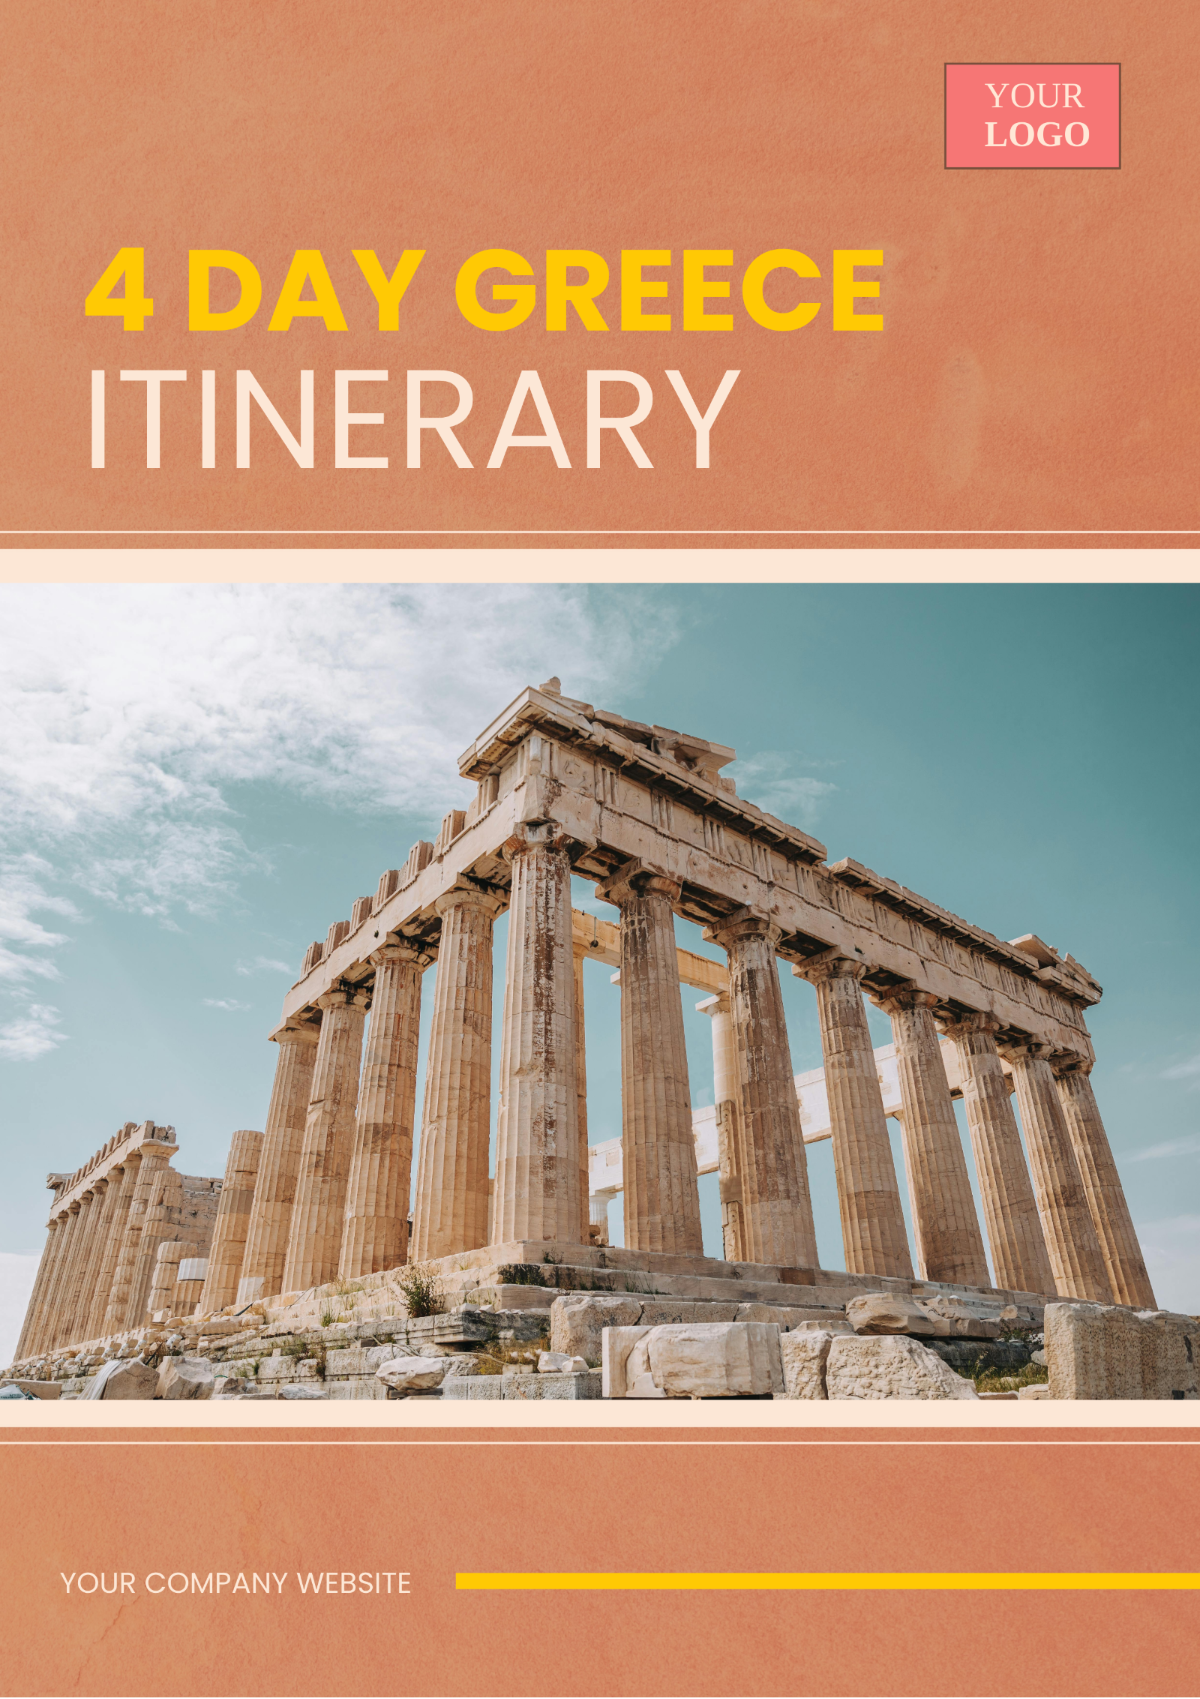 4 Day Greece Itinerary Template